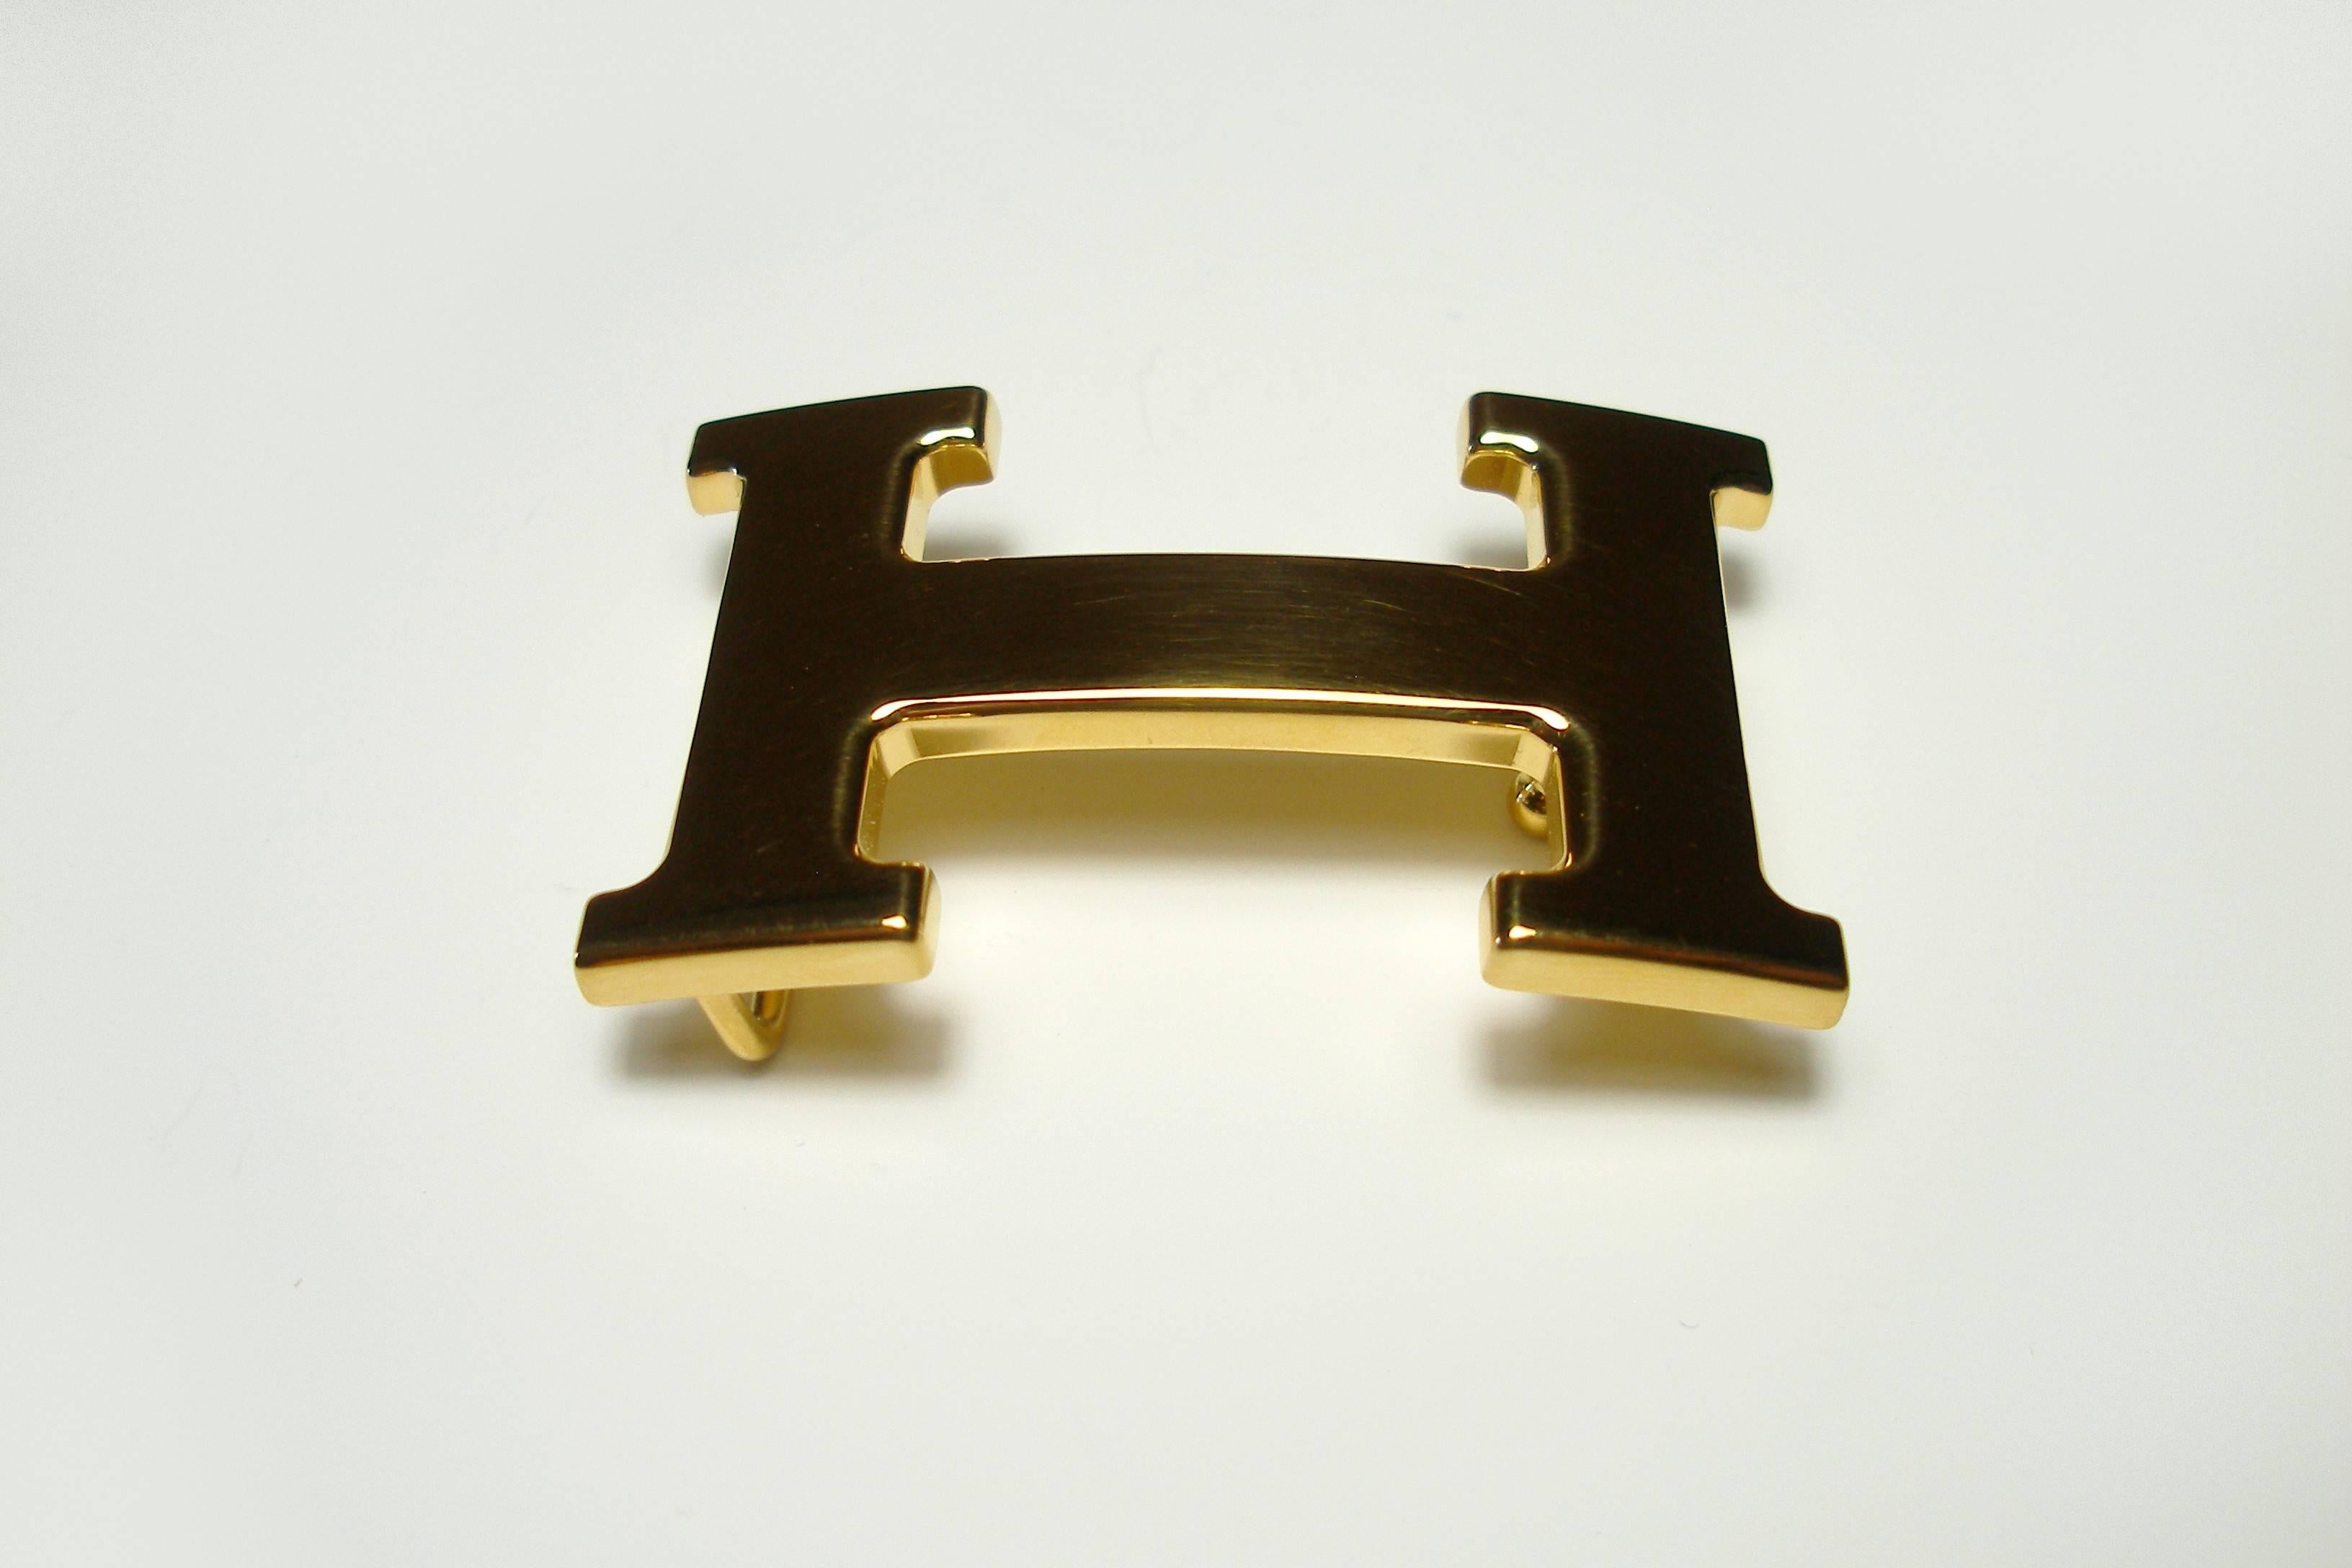 RARE GOLD PLATED HERMÈS BUCKLE H CONSTANCE 
Impossible to find in Hermès shop 
Signed 
Excellente condition
Belt Buckle in dustbag AL
For strap in 3.2 cm / only buckle 
INTERNATIONALS BUYERS CUSTOMS DUTIES AND TAXES ARE INCLUDED FOR THIS ITEM
Thank